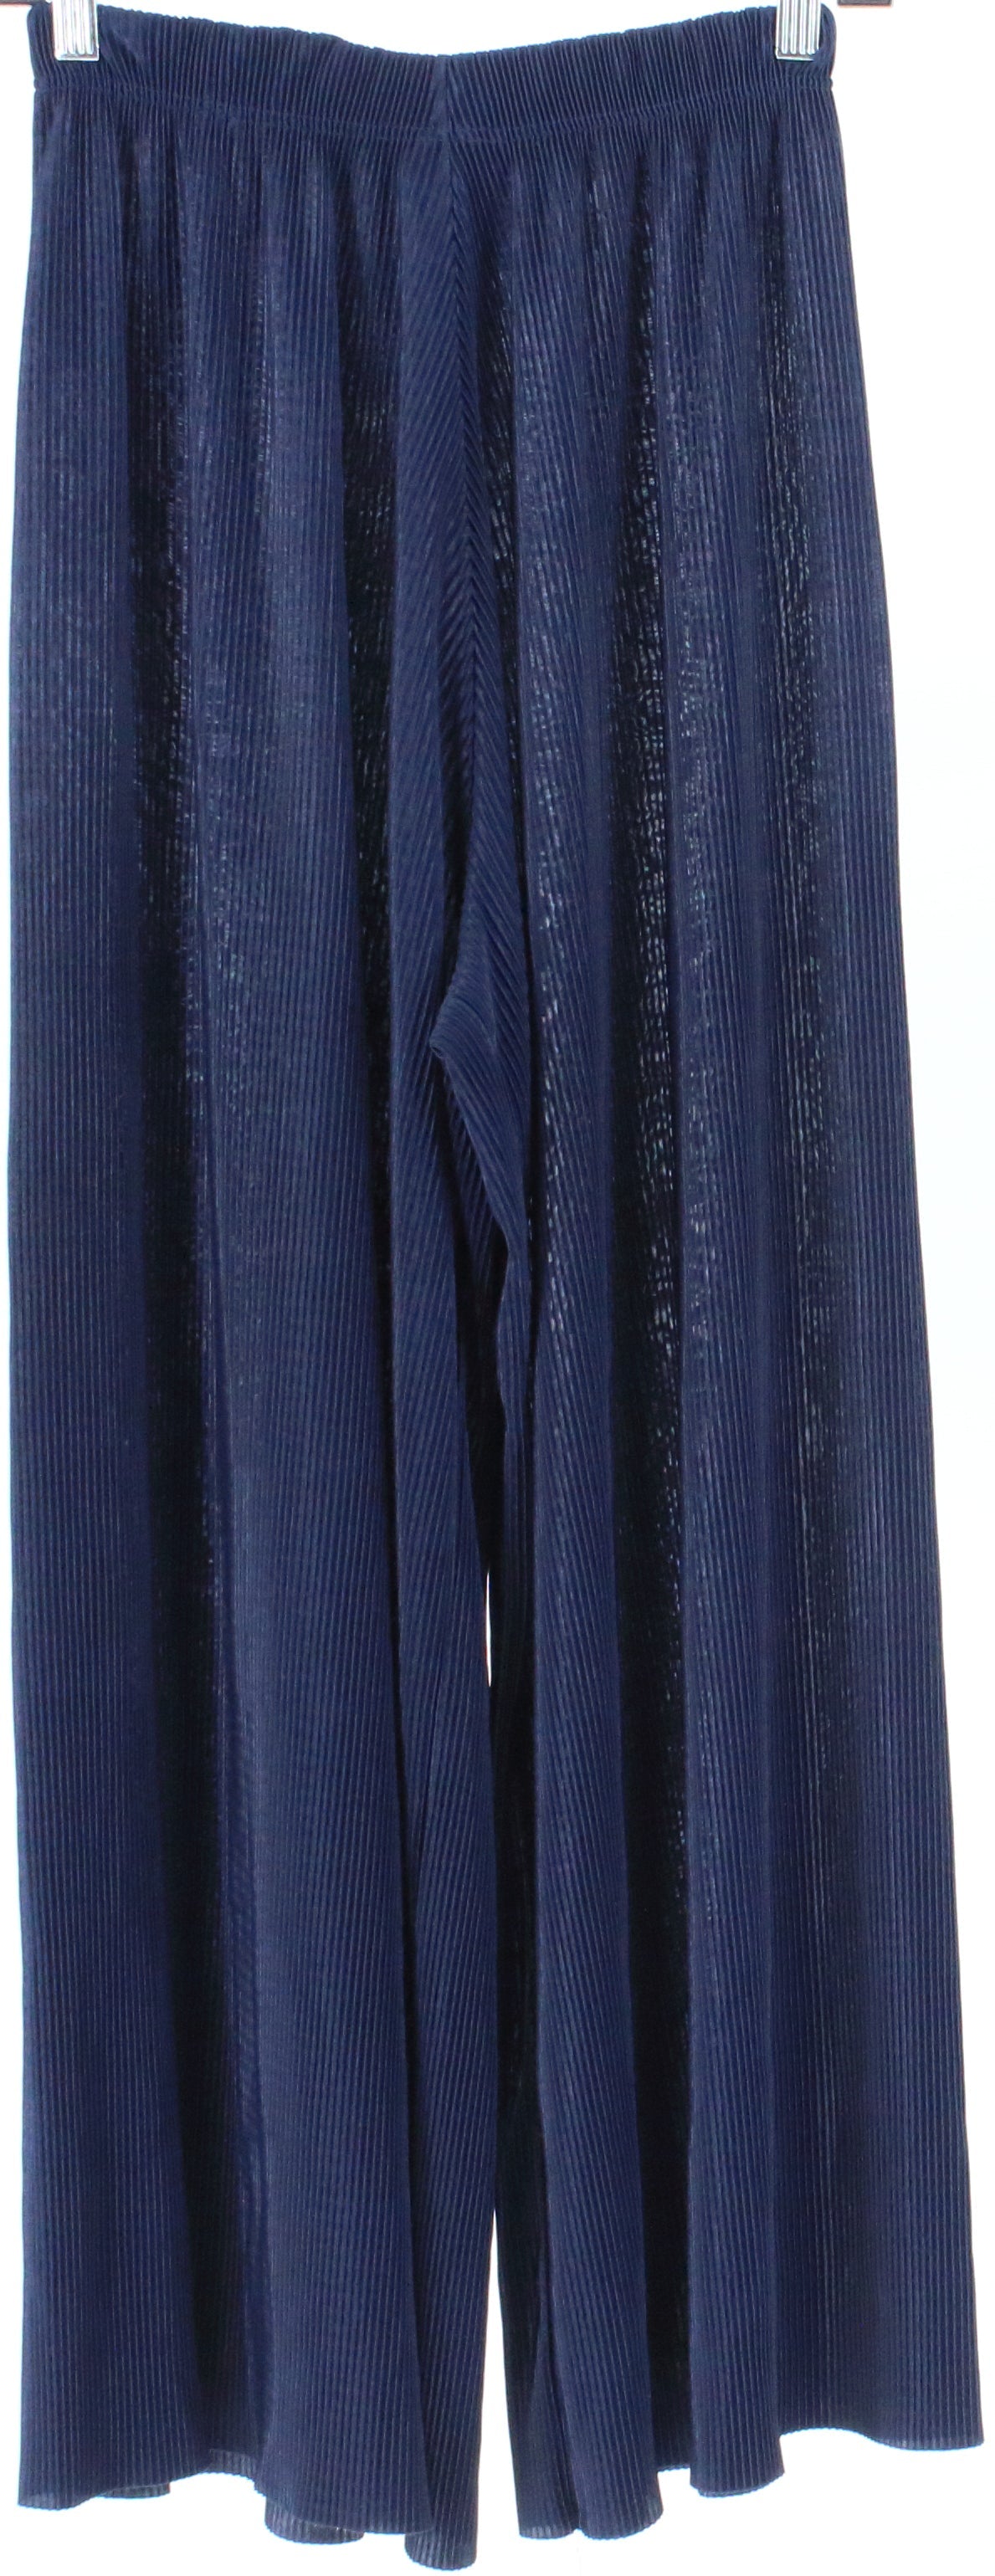 The Complex Navy Blue Pleated Pants